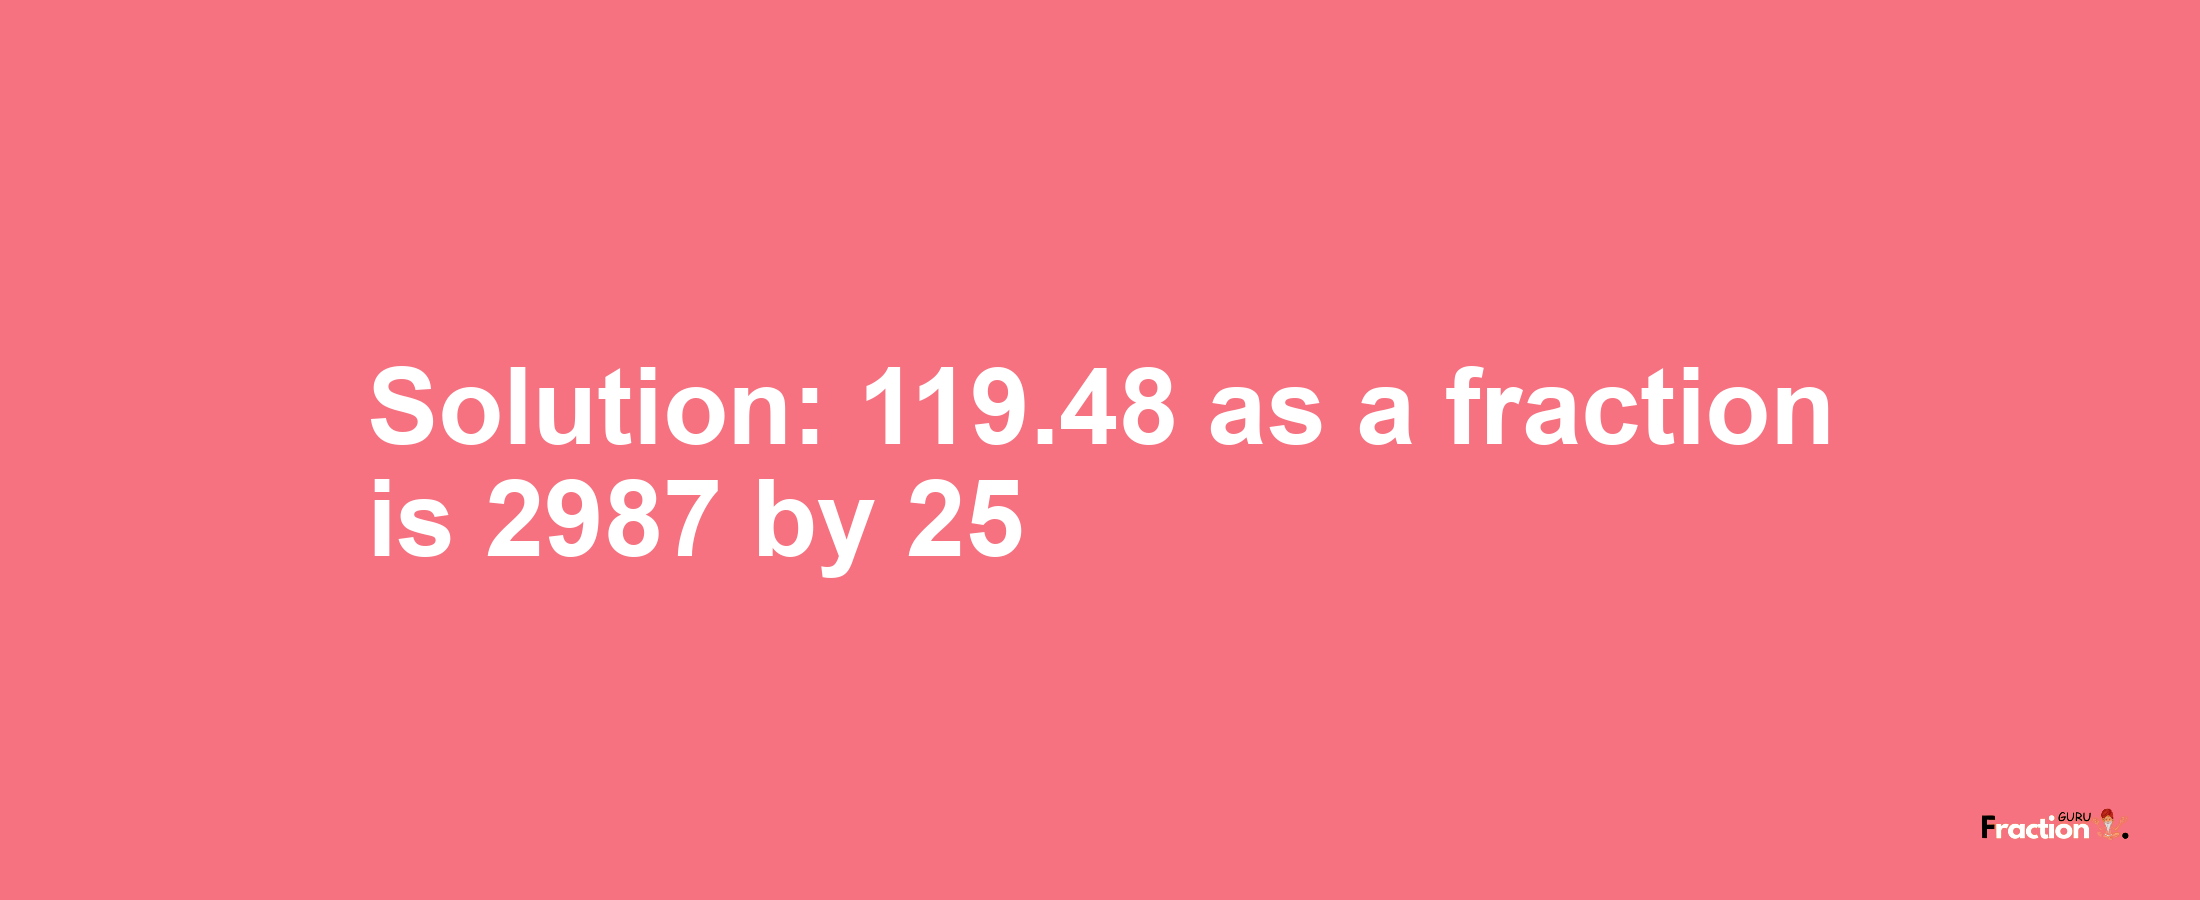 Solution:119.48 as a fraction is 2987/25